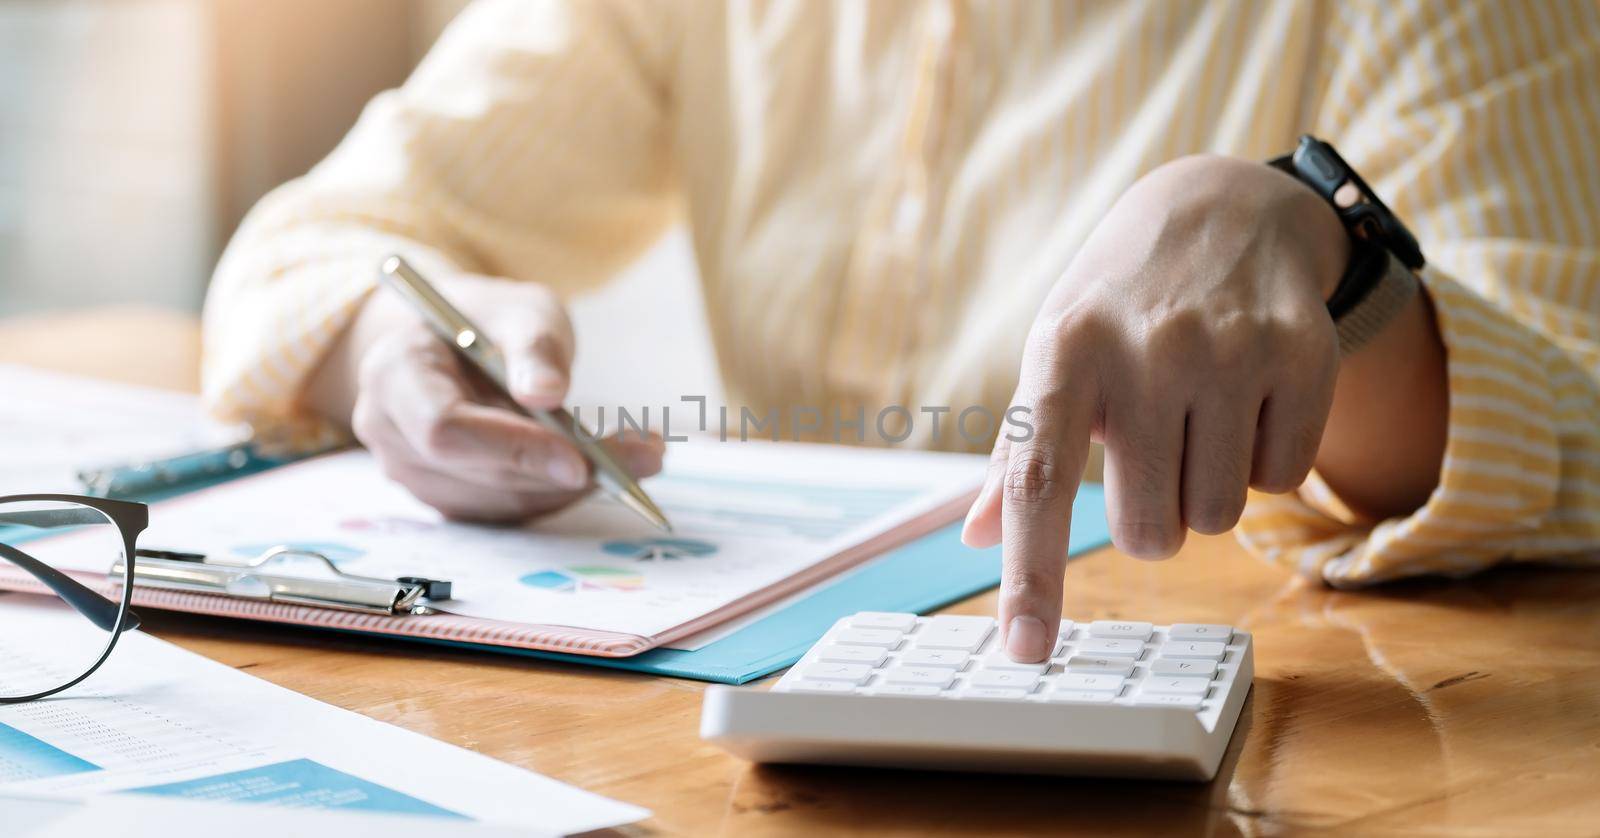 Accountant or bookkeeper working on desk using calculator, accounting finance concept